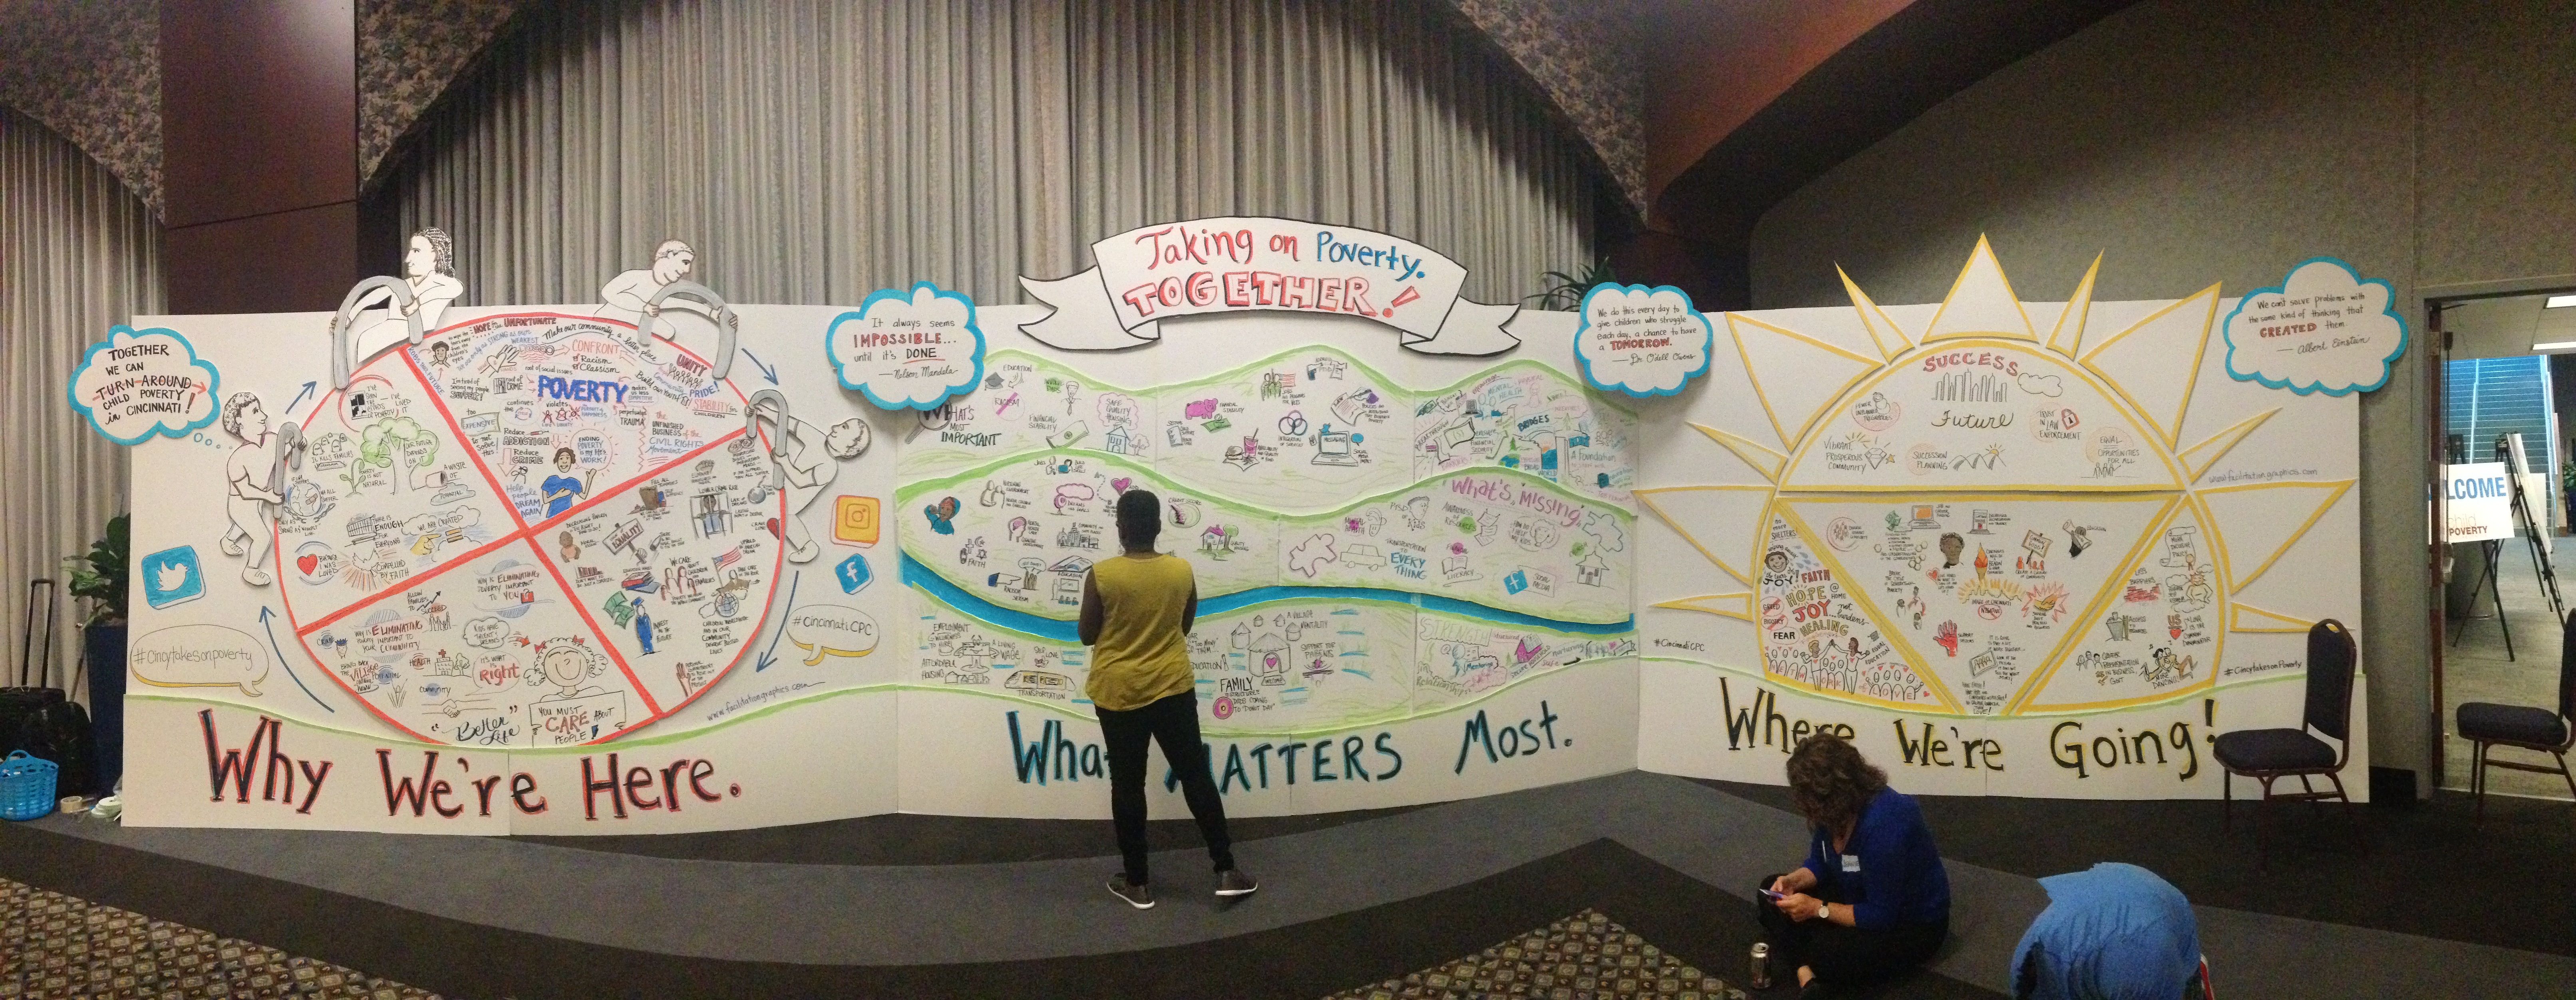 Graphic Recording for Child Poverty Collaborative Community Summit by Creative Catalyst, Katherine Torrini